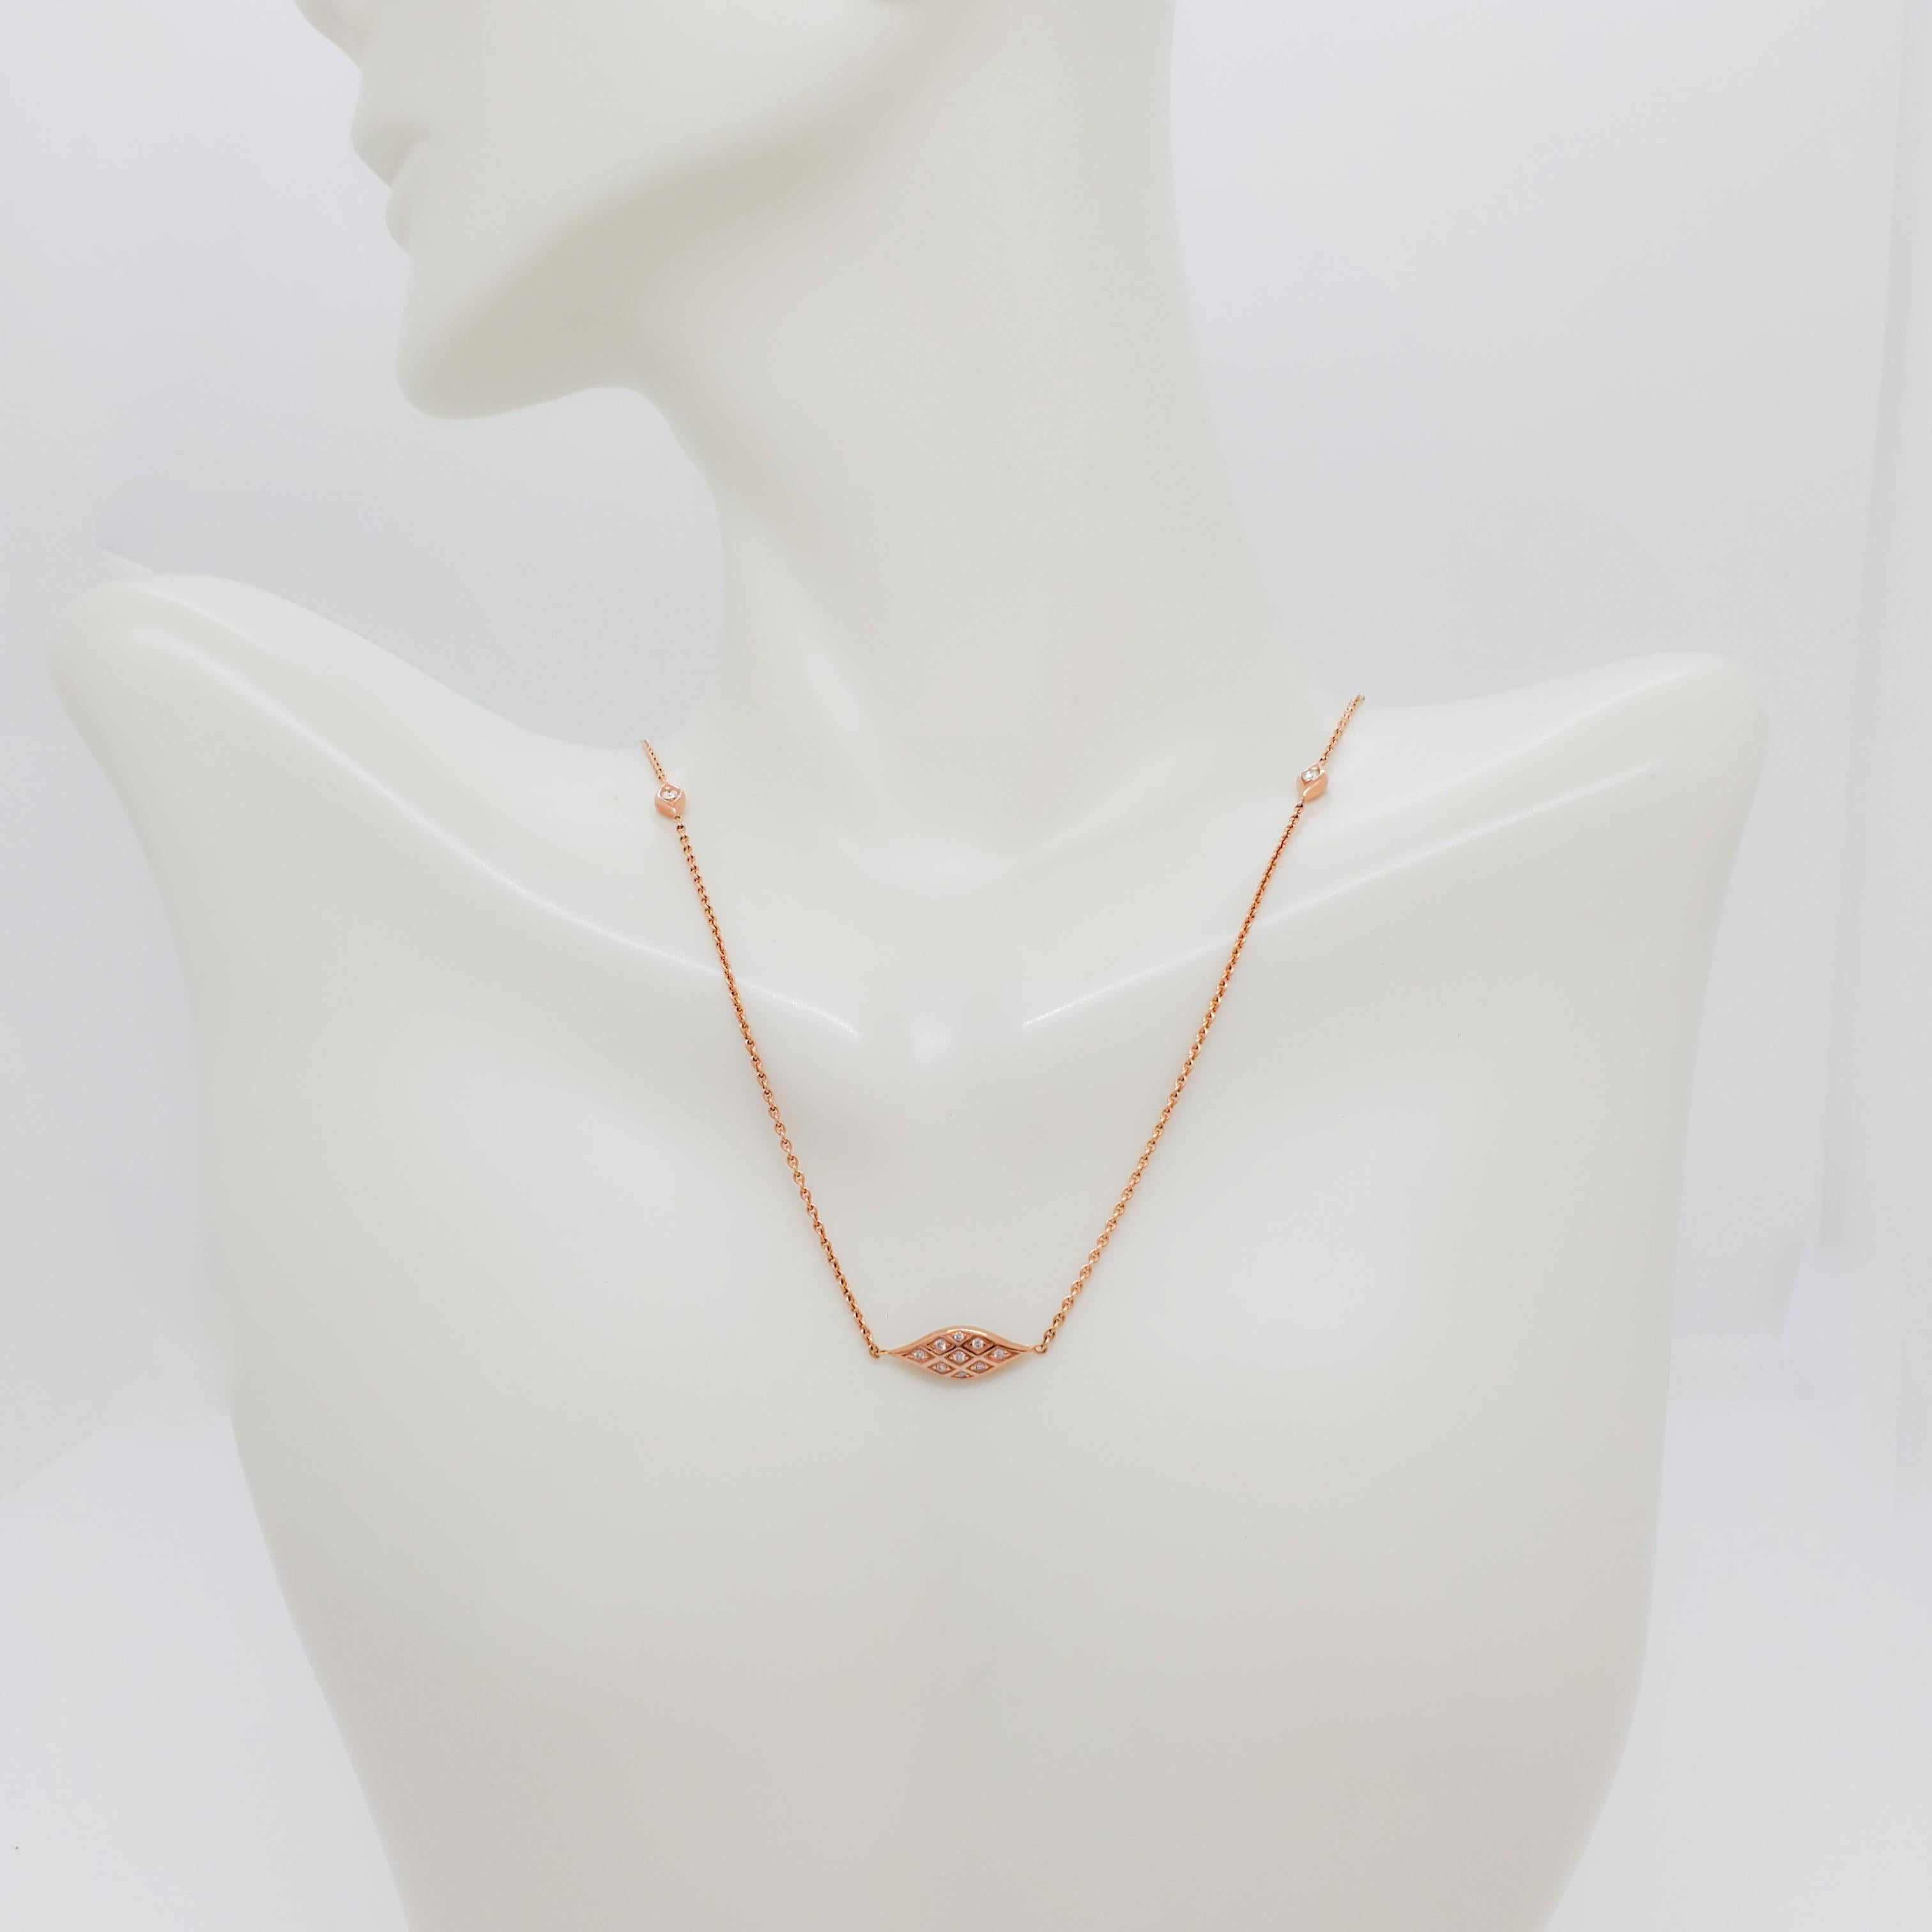 Beautiful Kabana necklace with pink mother of pearl and 0.11 ct. white diamond rounds. Handmade in 14k rose gold.